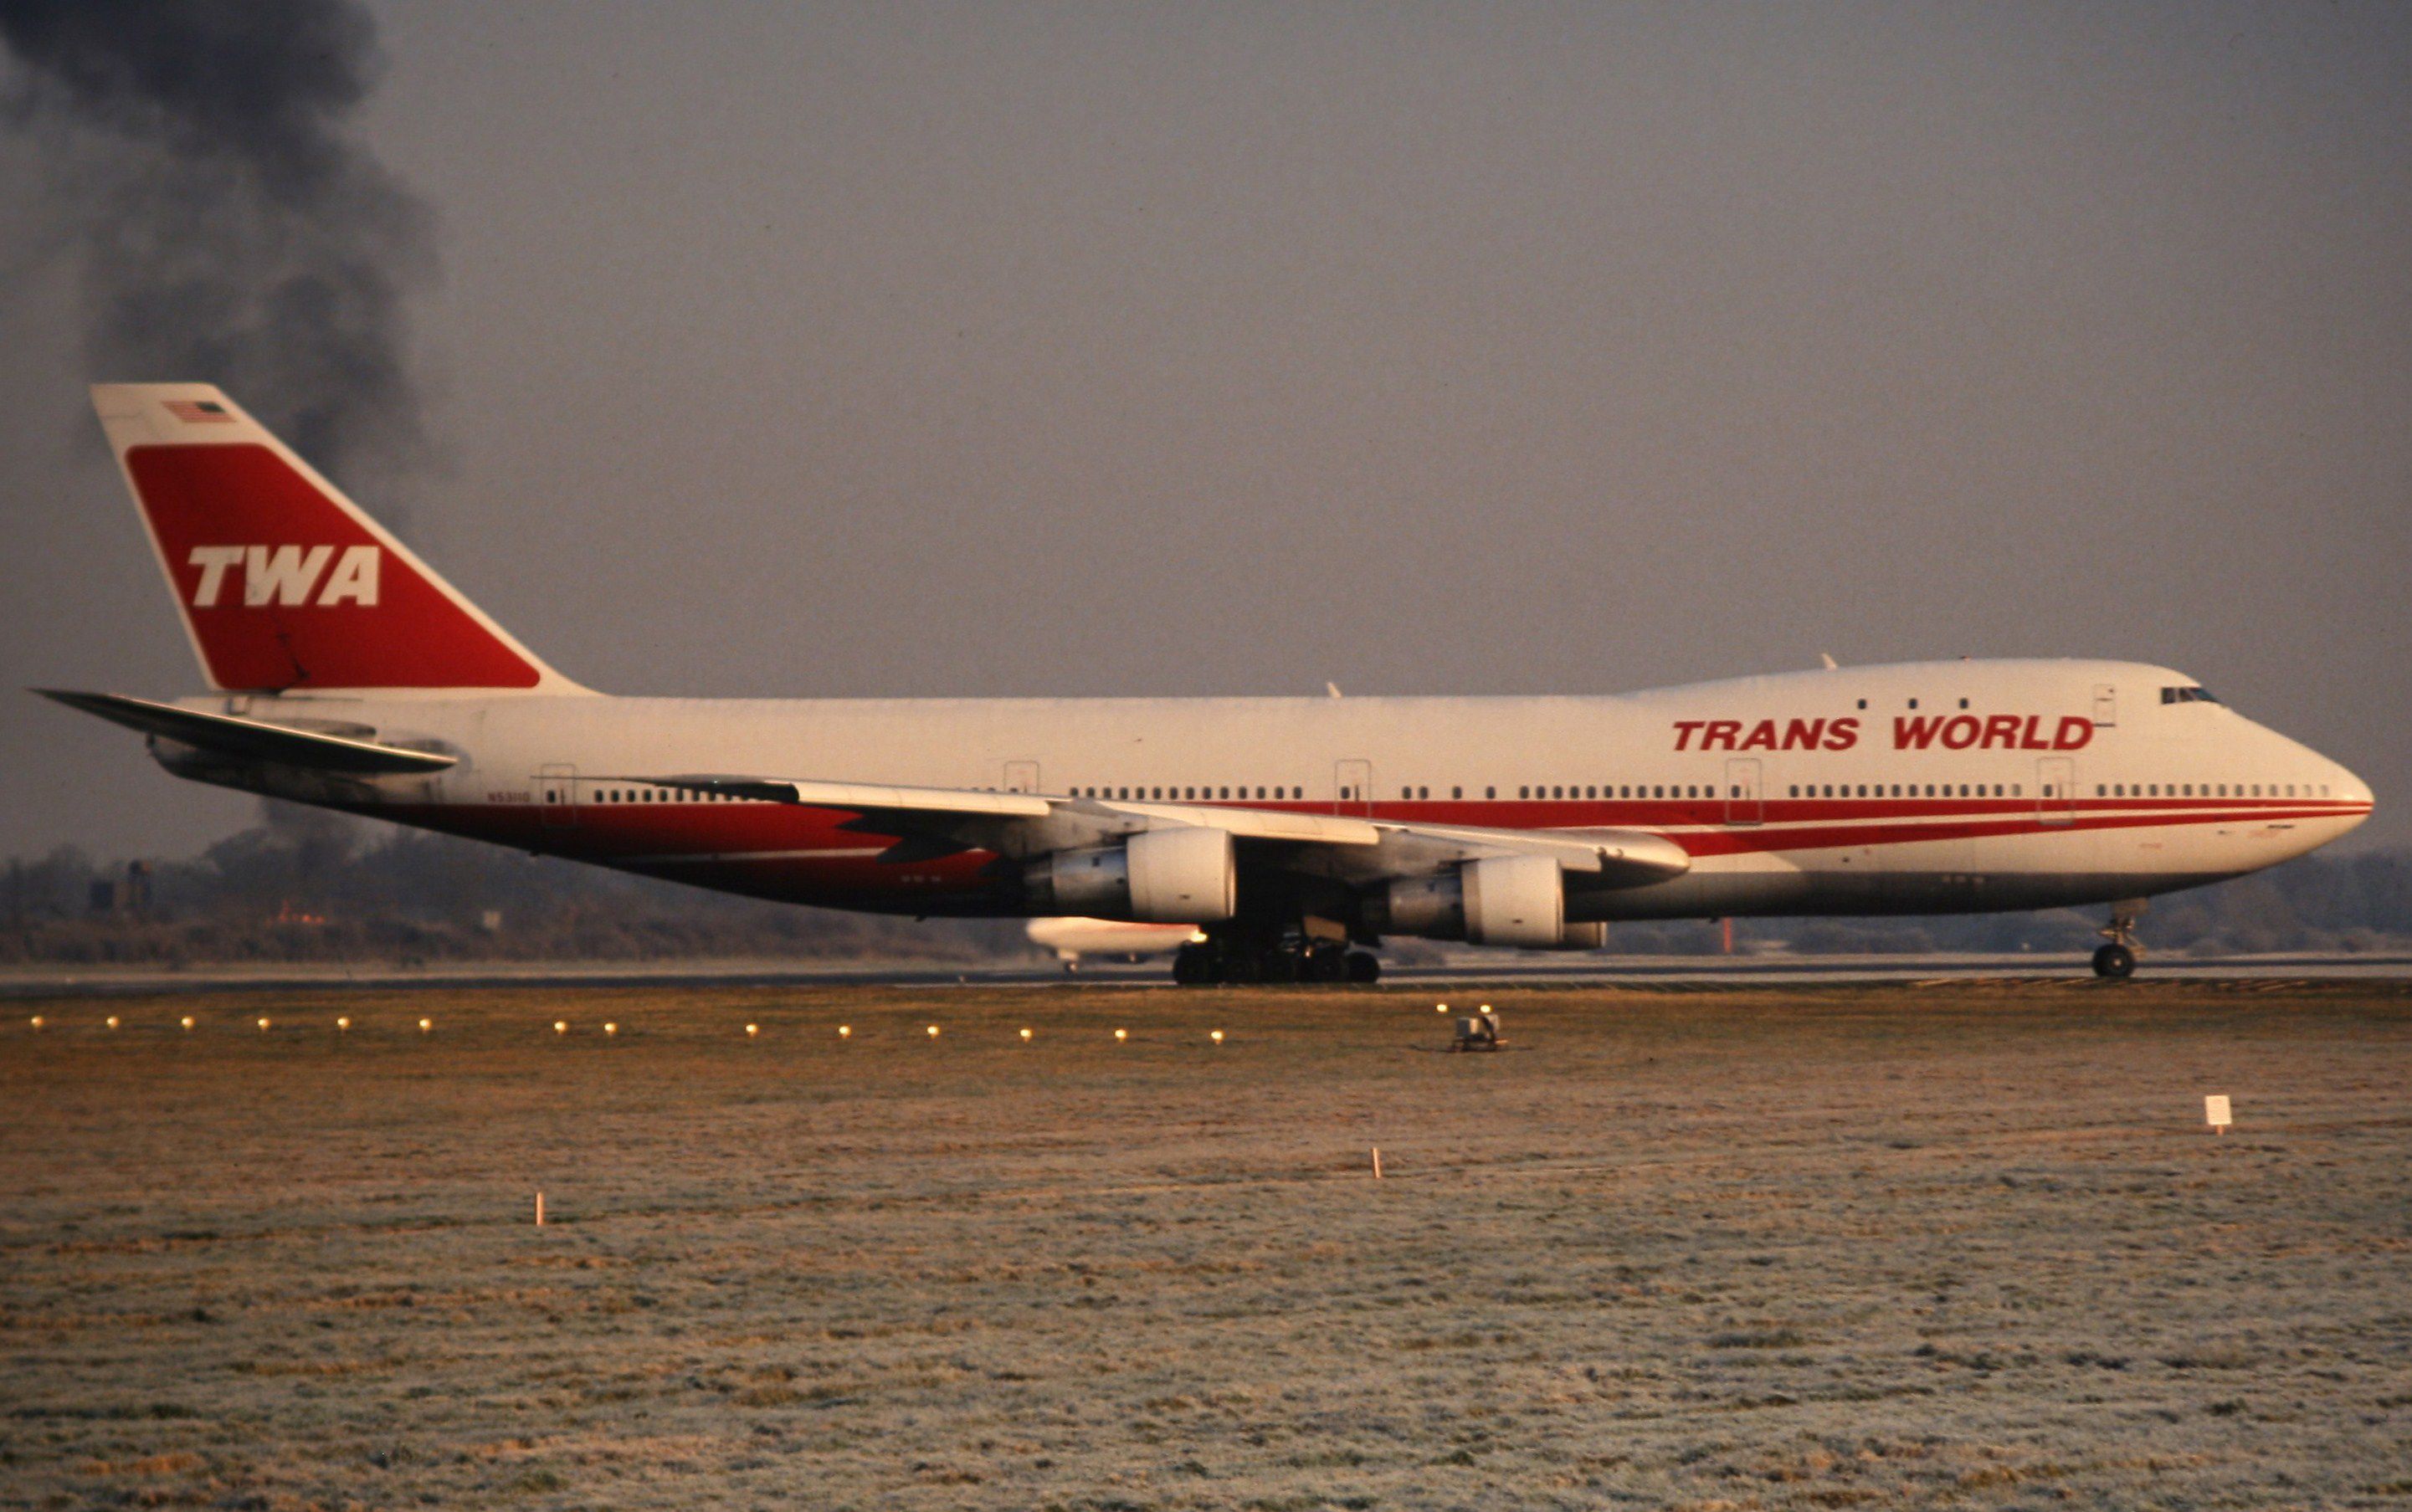 TWA Trans World Airlines Boeing 747-100 Seen taxying for departure from runway 08R at London Gatwick airport, England on 30th December 1992